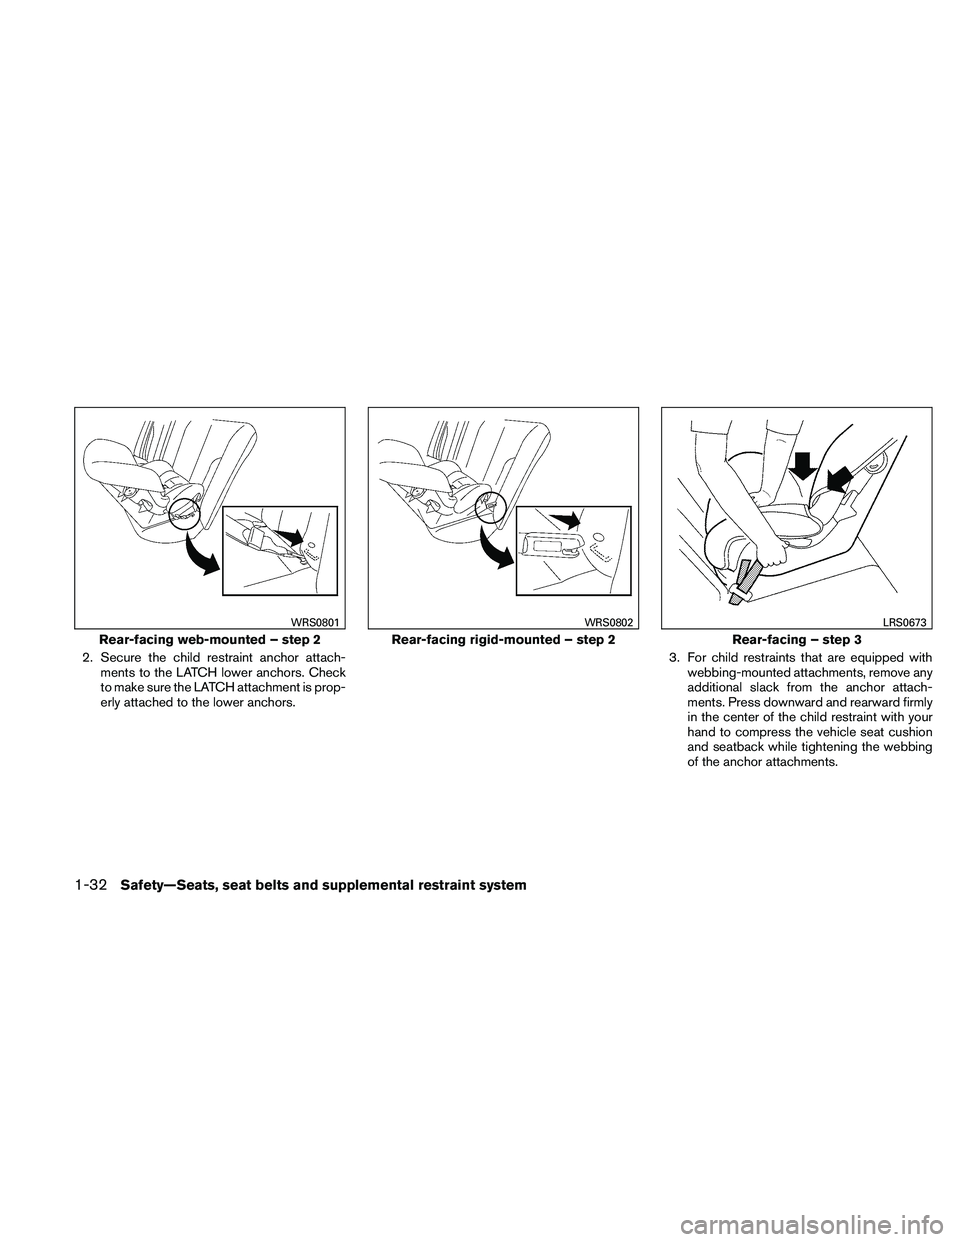 NISSAN XTERRA 2010  Owner´s Manual 2. Secure the child restraint anchor attach-ments to the LATCH lower anchors. Check
to make sure the LATCH attachment is prop-
erly attached to the lower anchors. 3. For child restraints that are equi